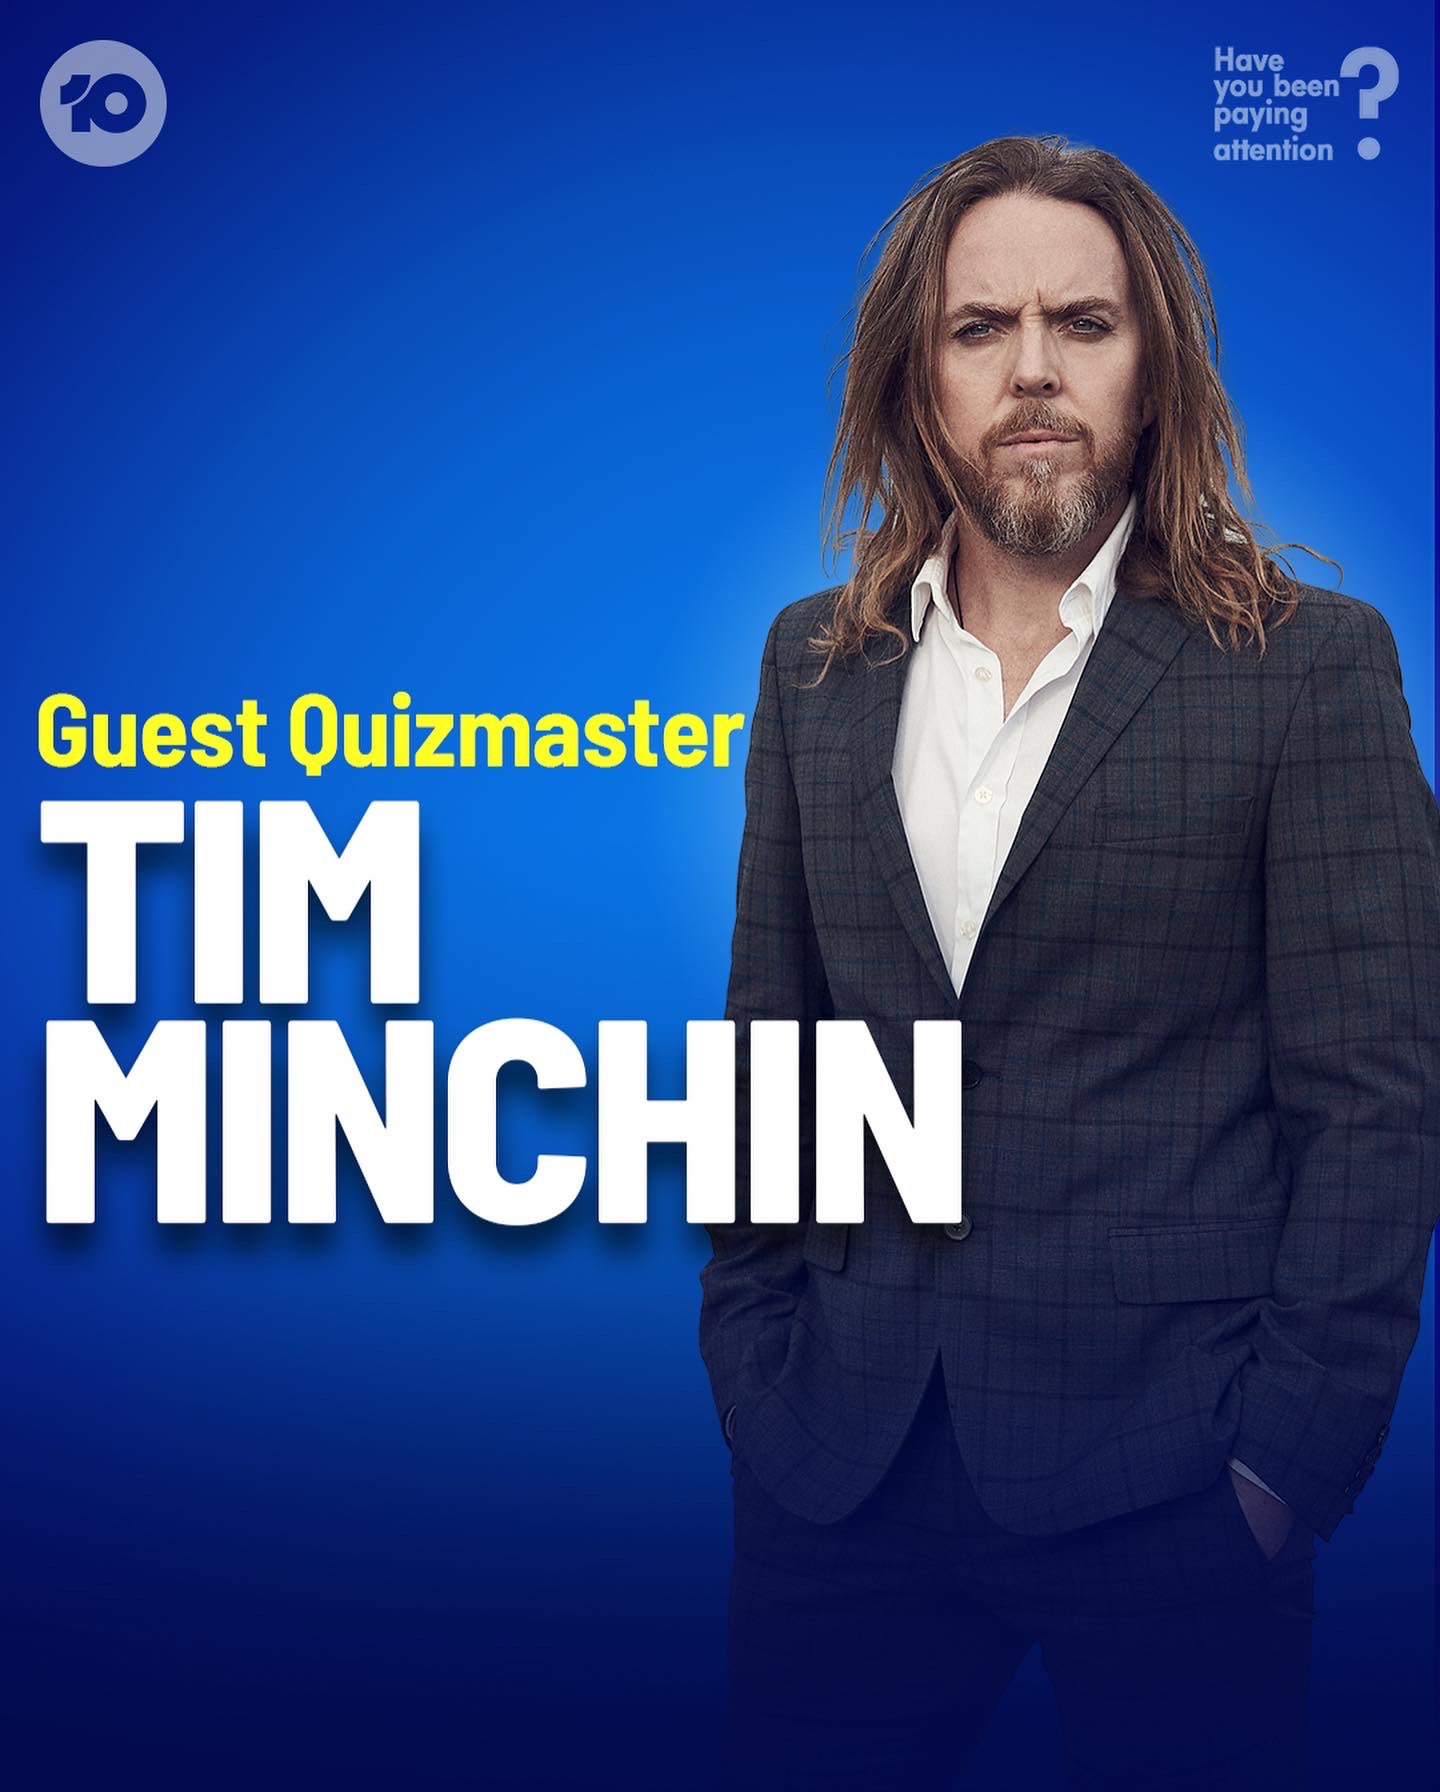 Tim Minchin "Here is a very serious photo of me promoting a deeply unserious show. 😂 Had much fun asking these idiots questions. #HYBPA 8:40pm @Channel10AU https://t.co/tYD5CUwffR" / Twitter